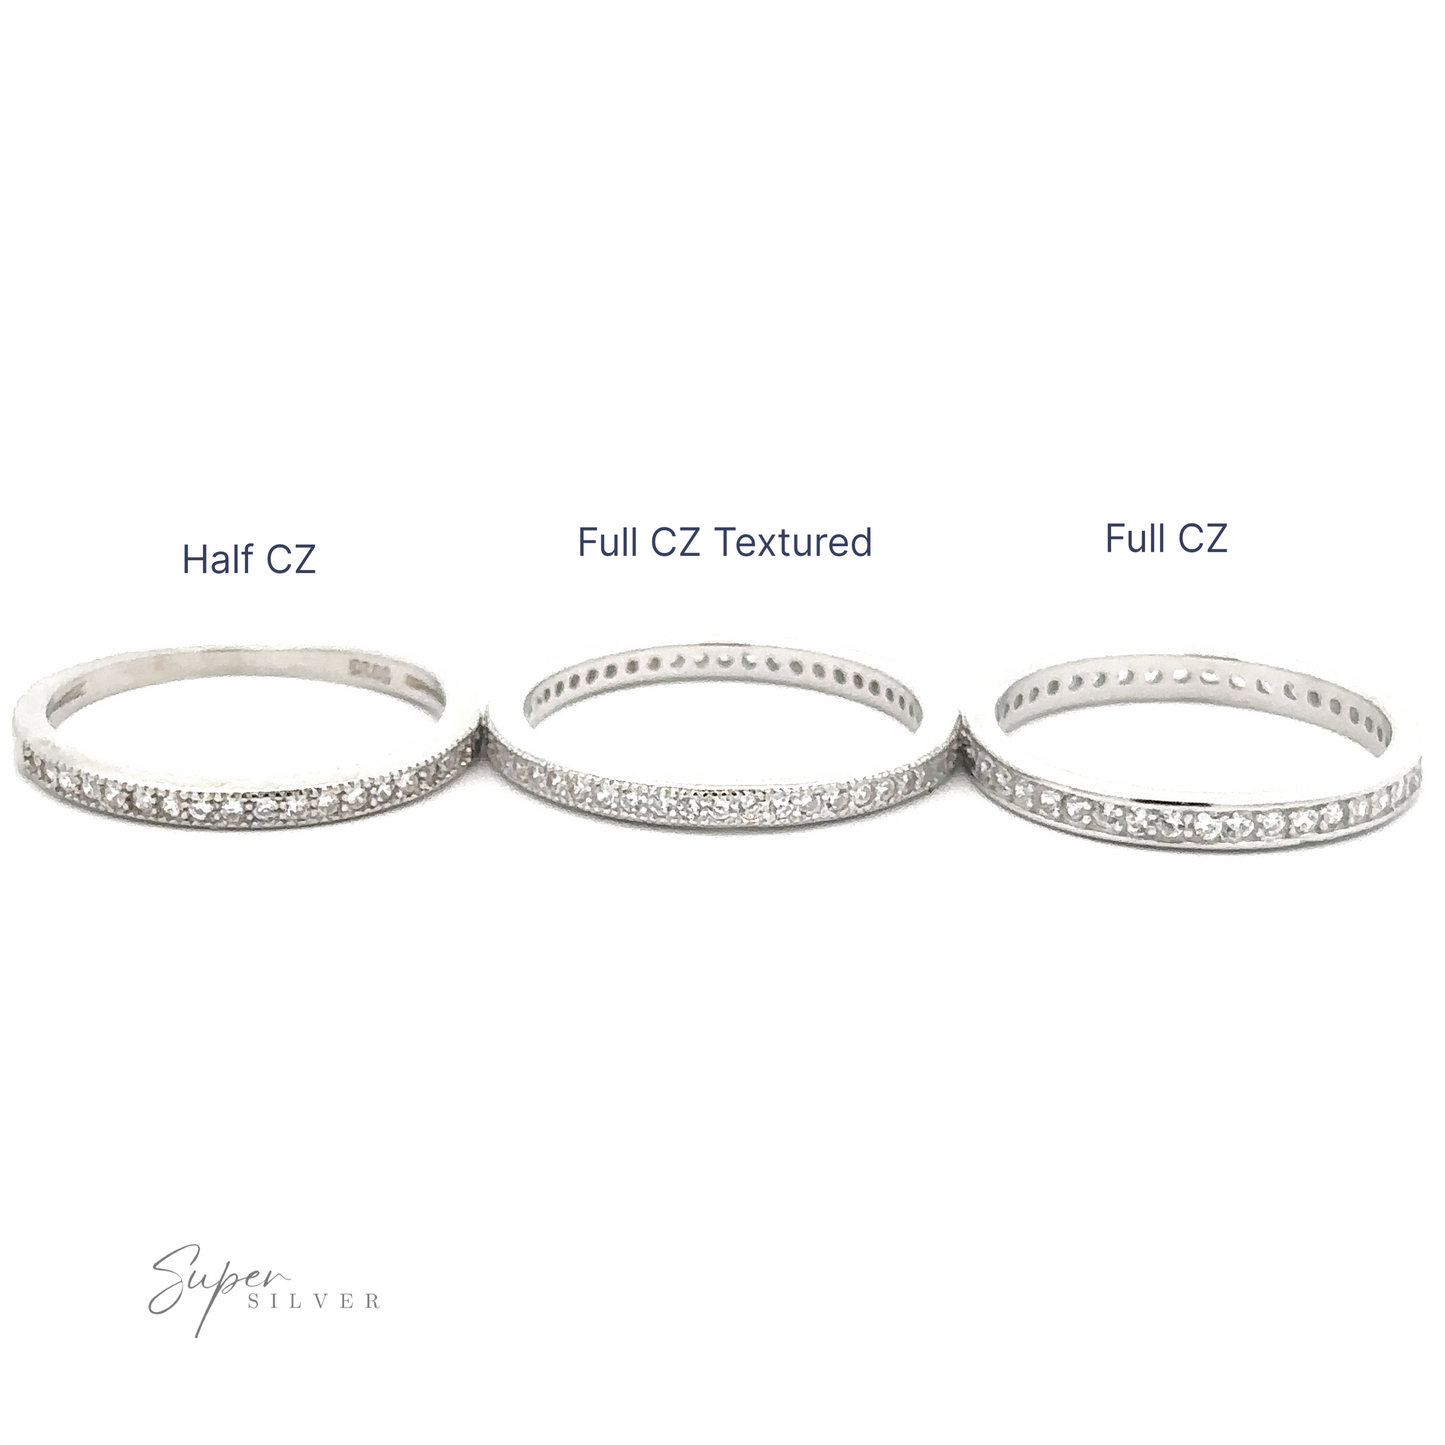 
                  
                    Three sterling silver bracelets are shown: "Half CZ" on the left, "Full CZ Textured" in the middle, and "Full CZ" on the right. Each is adorned with cubic zirconia crystals, reminiscent of a Classic Pave Cubic Zirconia Eternity Ring's elegance.
                  
                